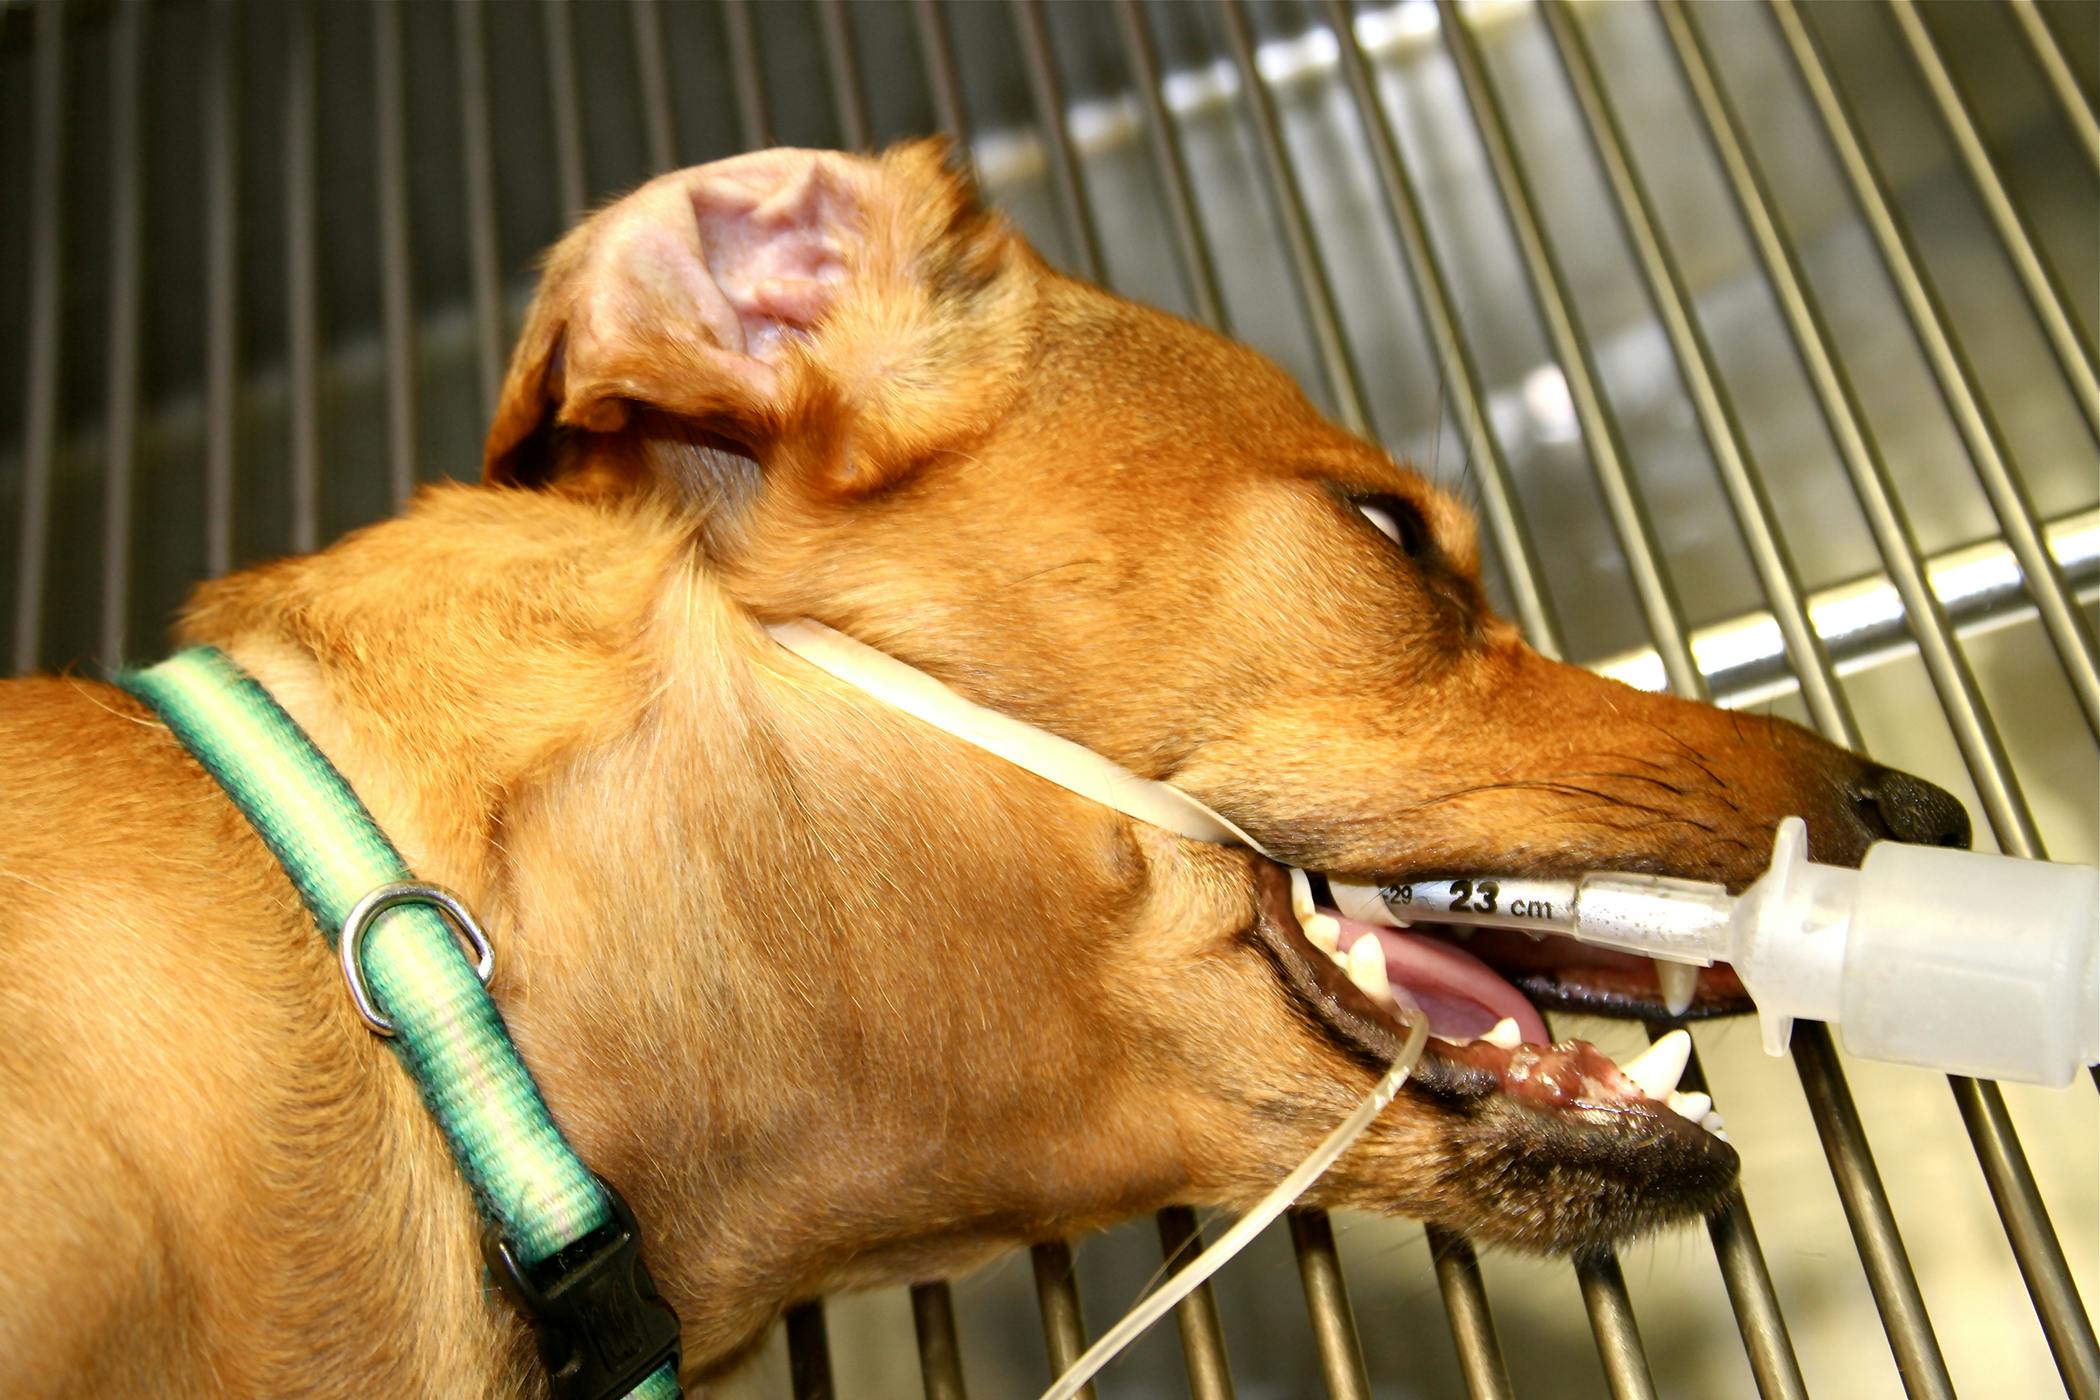 Feeding Tubes in Dogs - Conditions Treated, Procedure, Efficacy